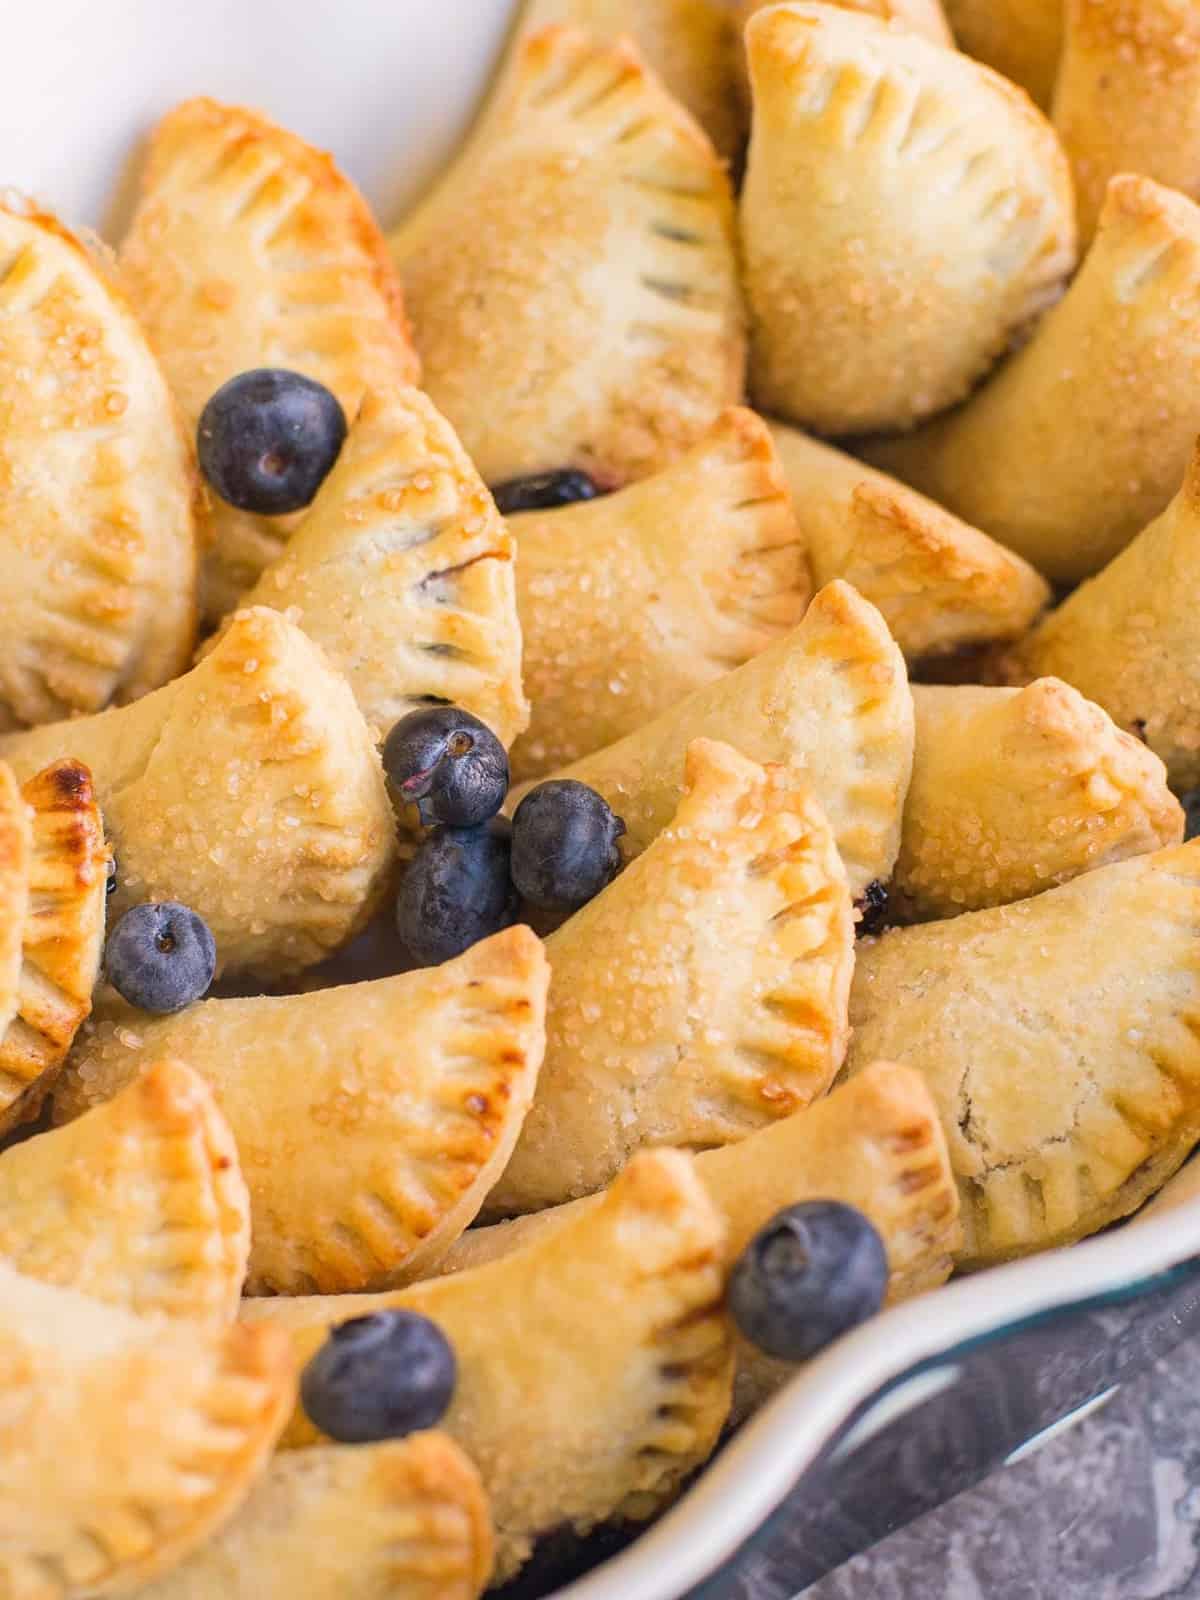 a tray full of homemade blueberry hand pies, topped with a few fresh blueberries